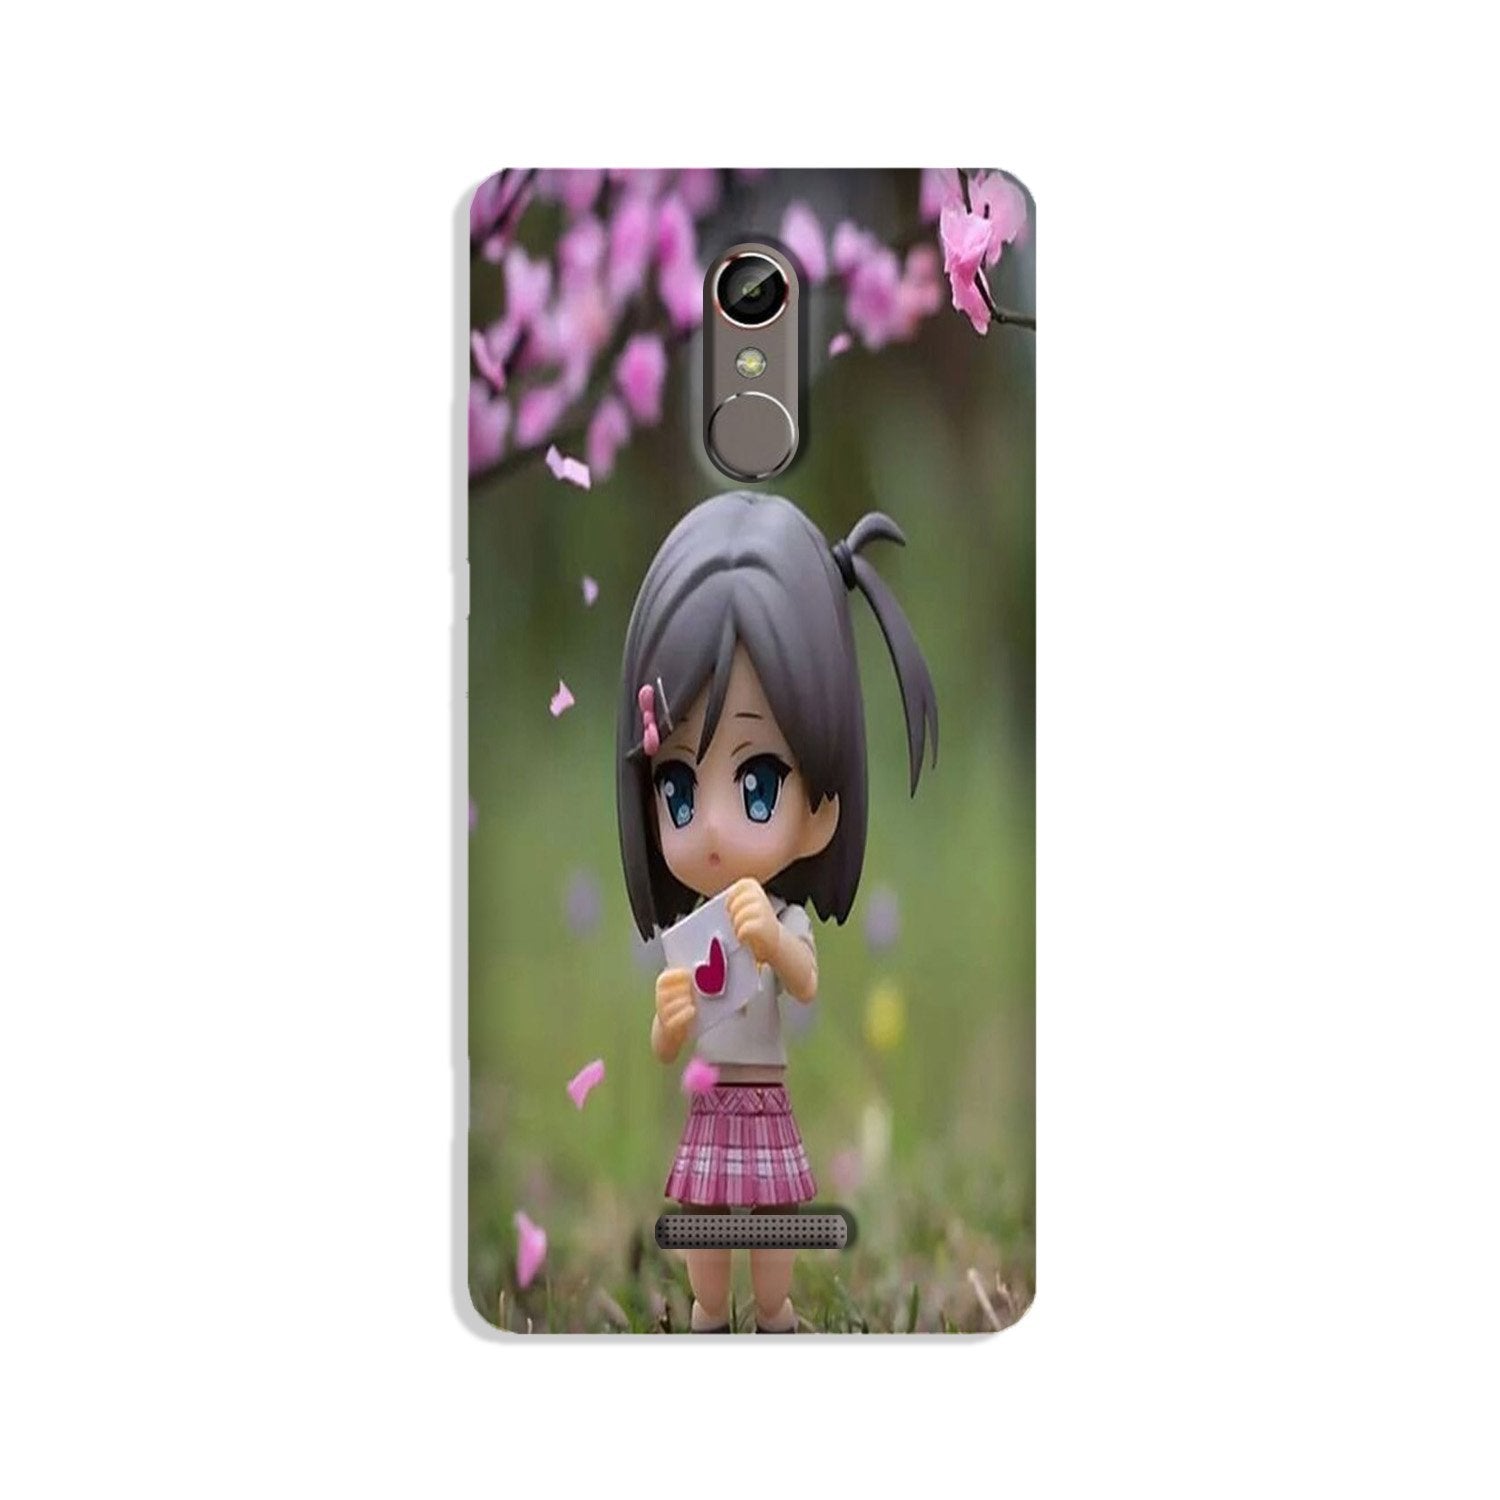 Cute Girl Case for Gionee S6s